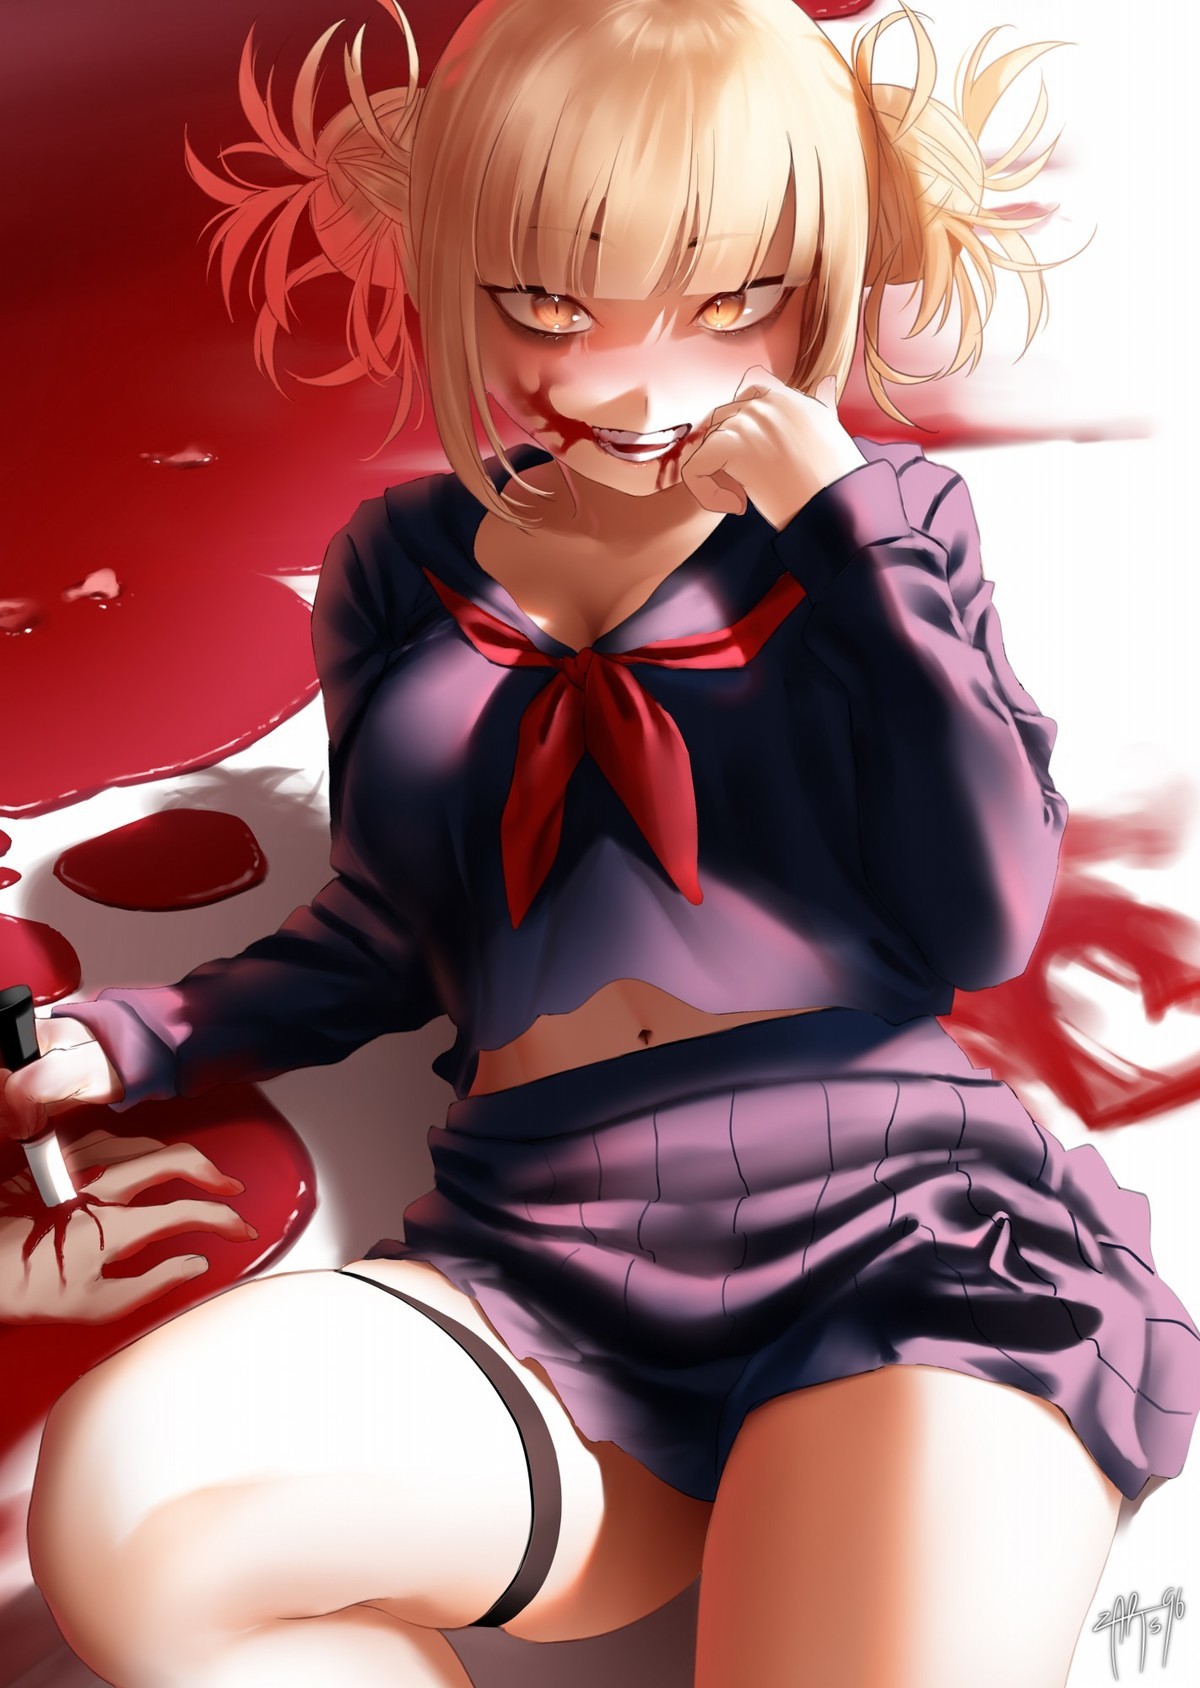 Daily Toga - 976: Messy Eater. join list: DailyToga (503 subs)Mention History Source: .. Damn look at those thighs